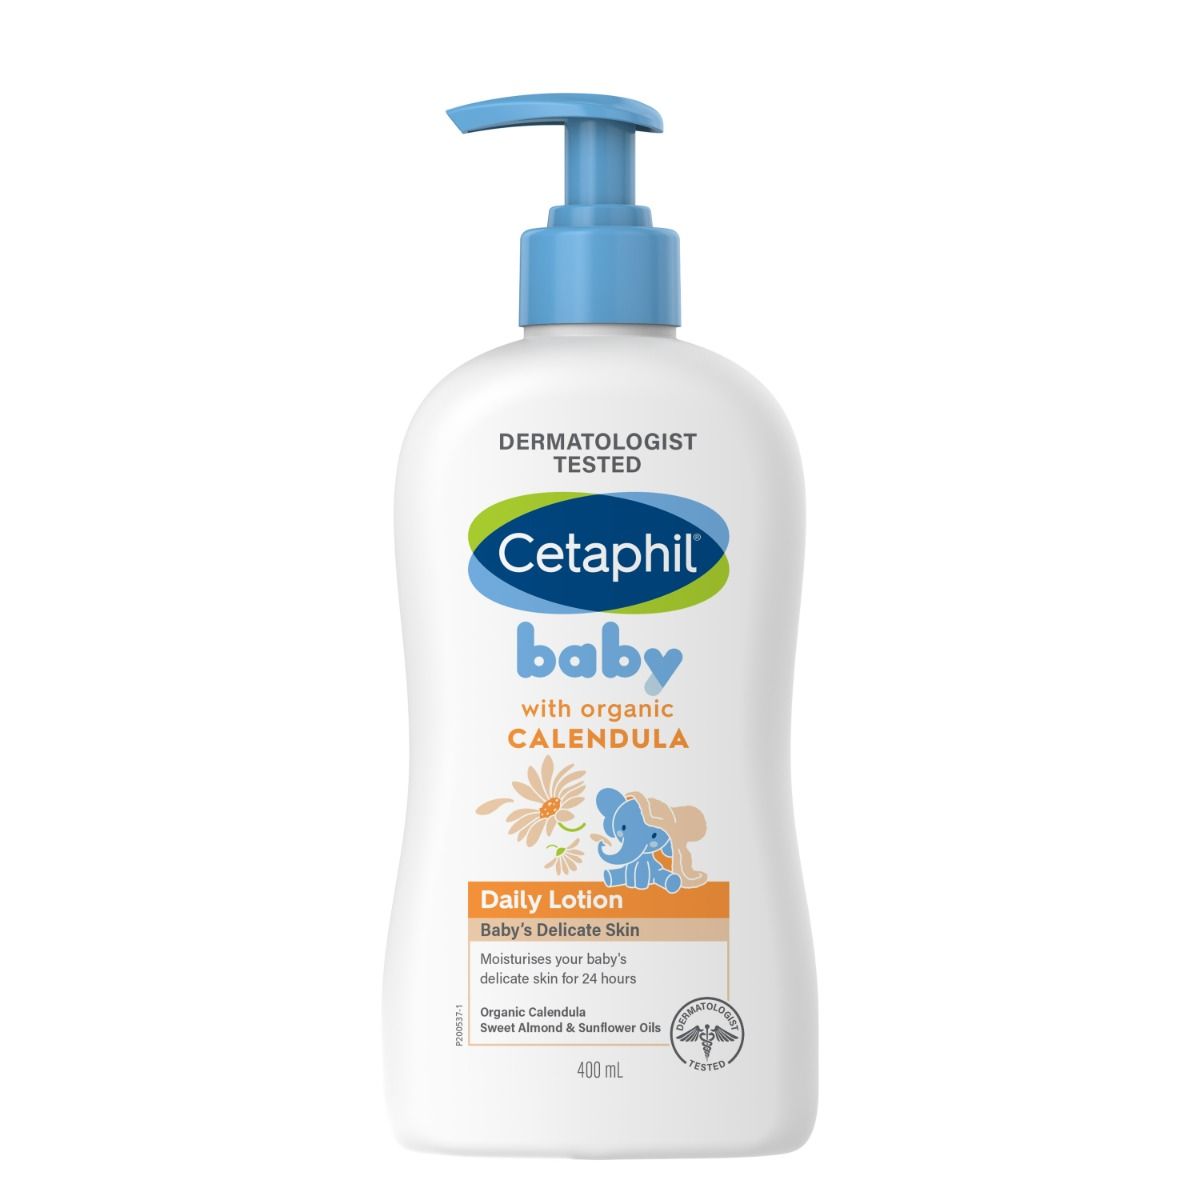 Cetaphil Baby Daily Lotion with Organic Calendula, 400 ml, Pack of 1 